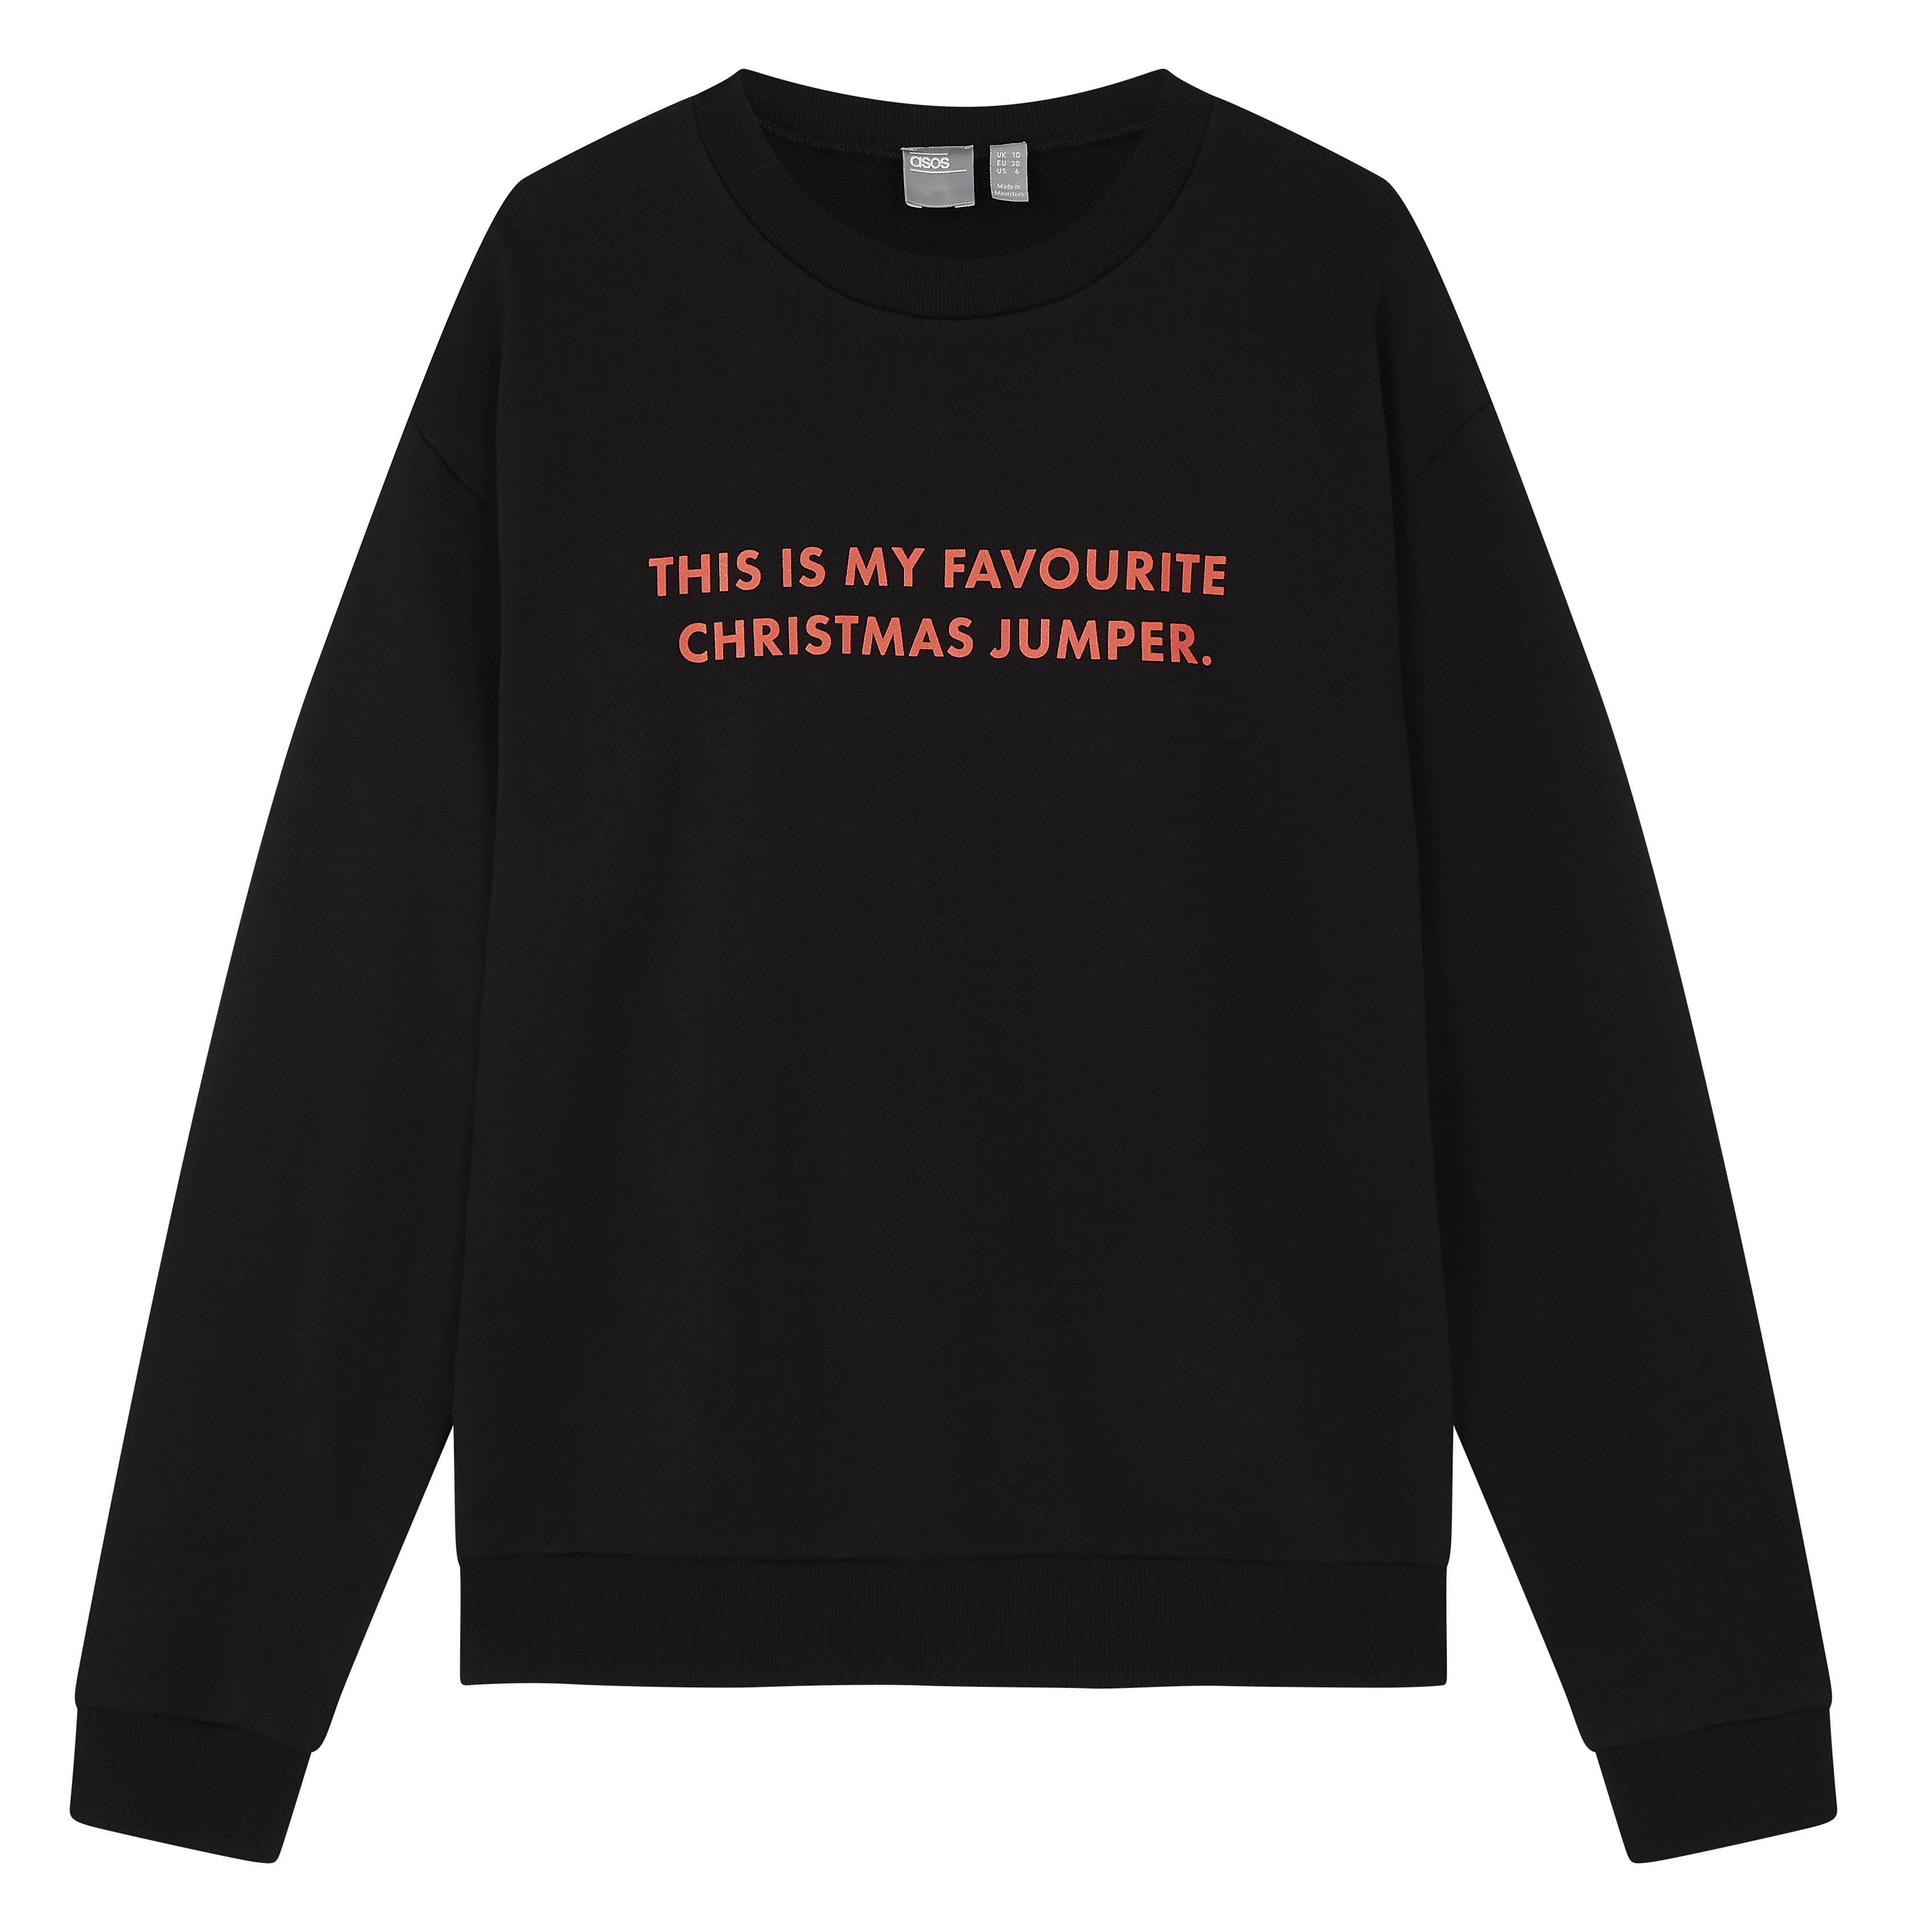 asos_design_this_is_my_favouriter_christmas_jumper_ps25_5fc7cf78e43bf.jpg